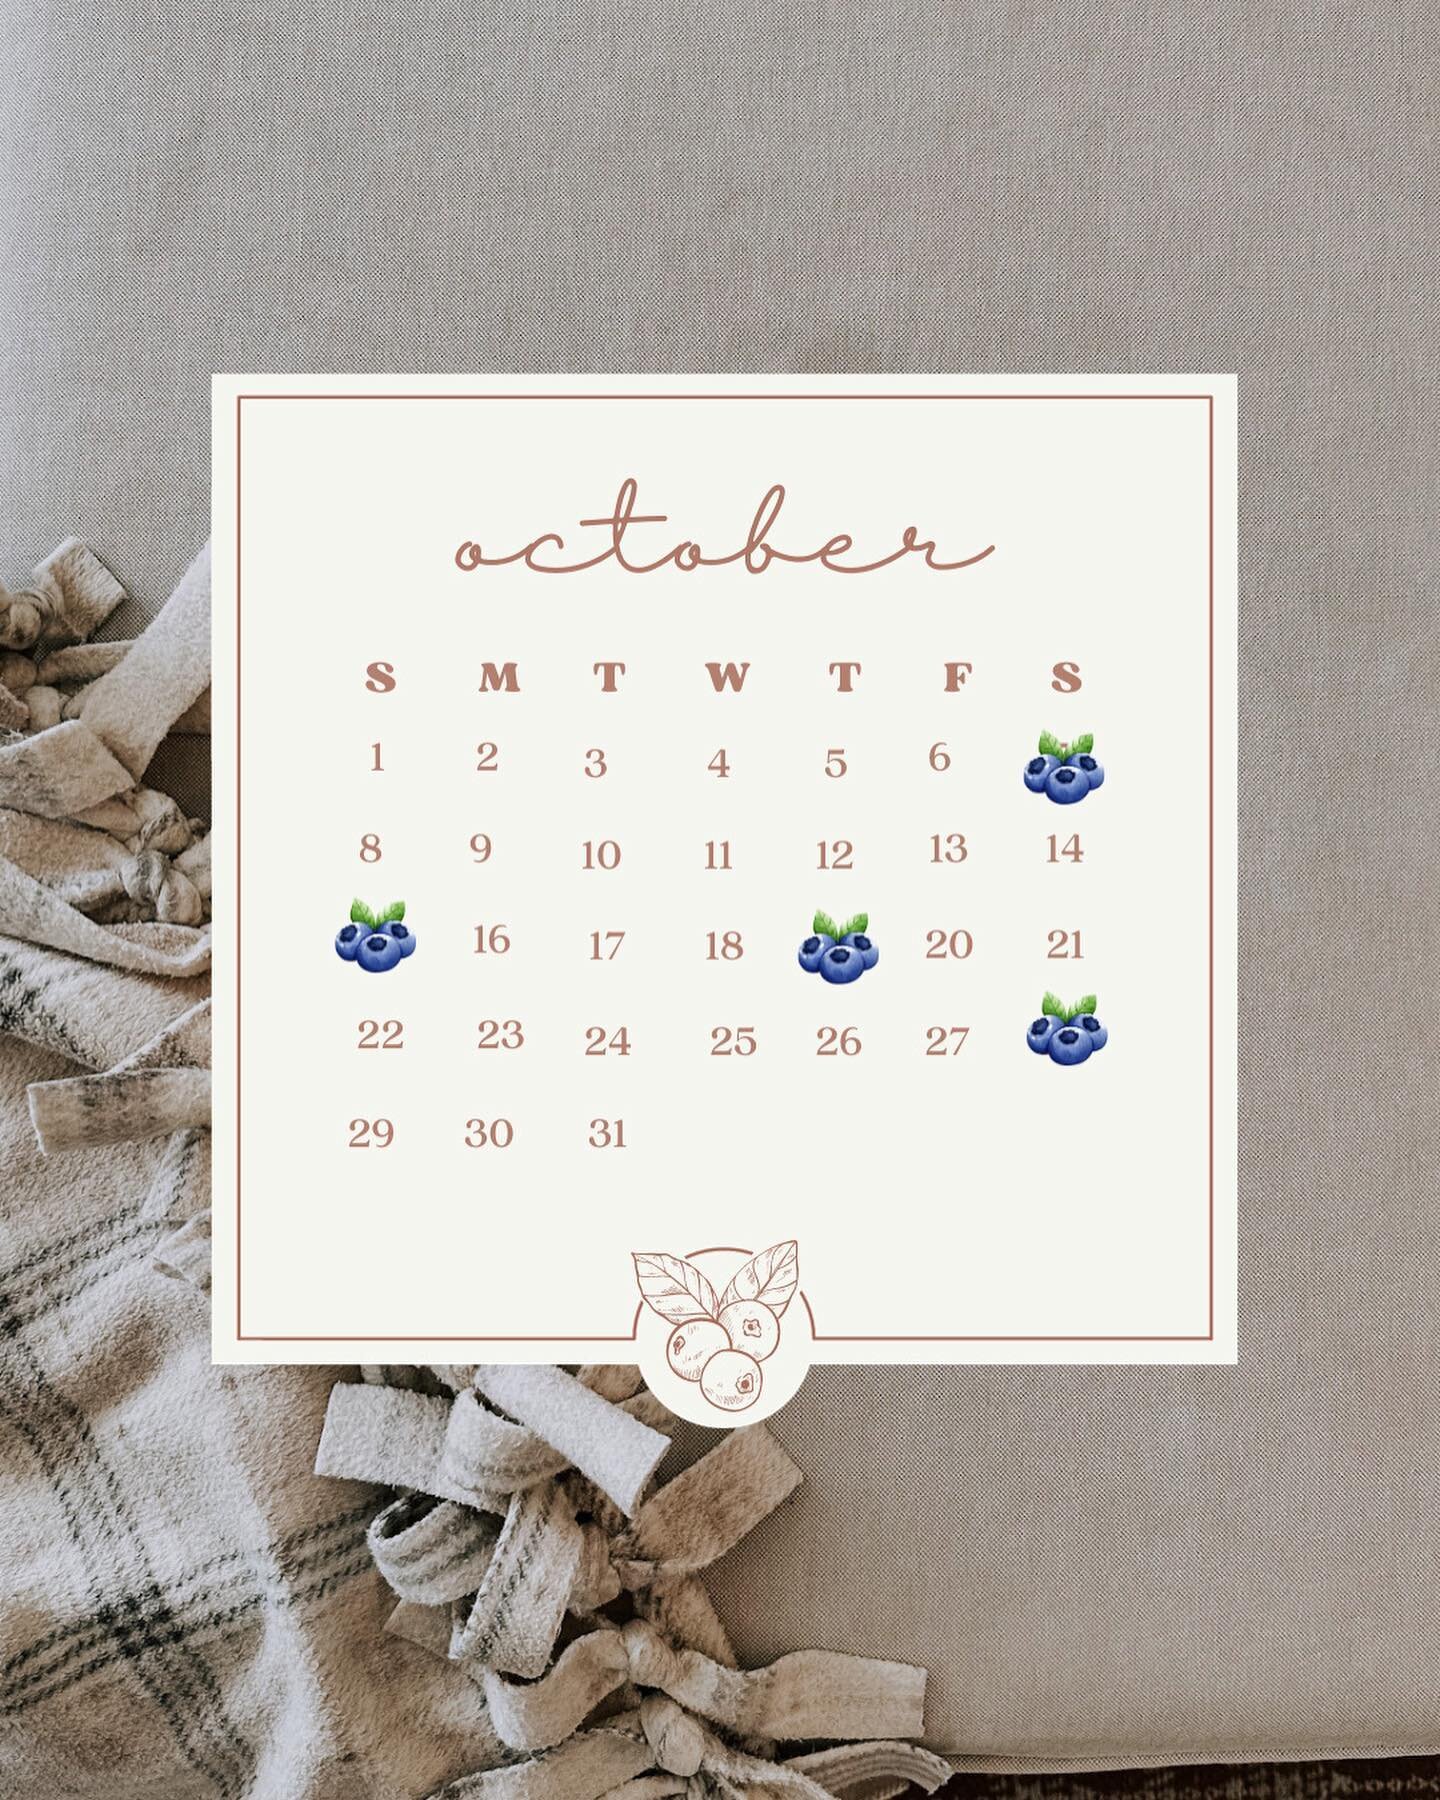 Our October public events &mdash;
⠀⠀⠀⠀⠀⠀⠀⠀⠀
All things fall market at refuge coffee in crown point tomorrow! @refuge_culture 
⠀⠀⠀⠀⠀⠀⠀⠀⠀
Wave of Light is October 15 &amp; although we&rsquo;d love to host the community for this gathering, that&rsquo;s 